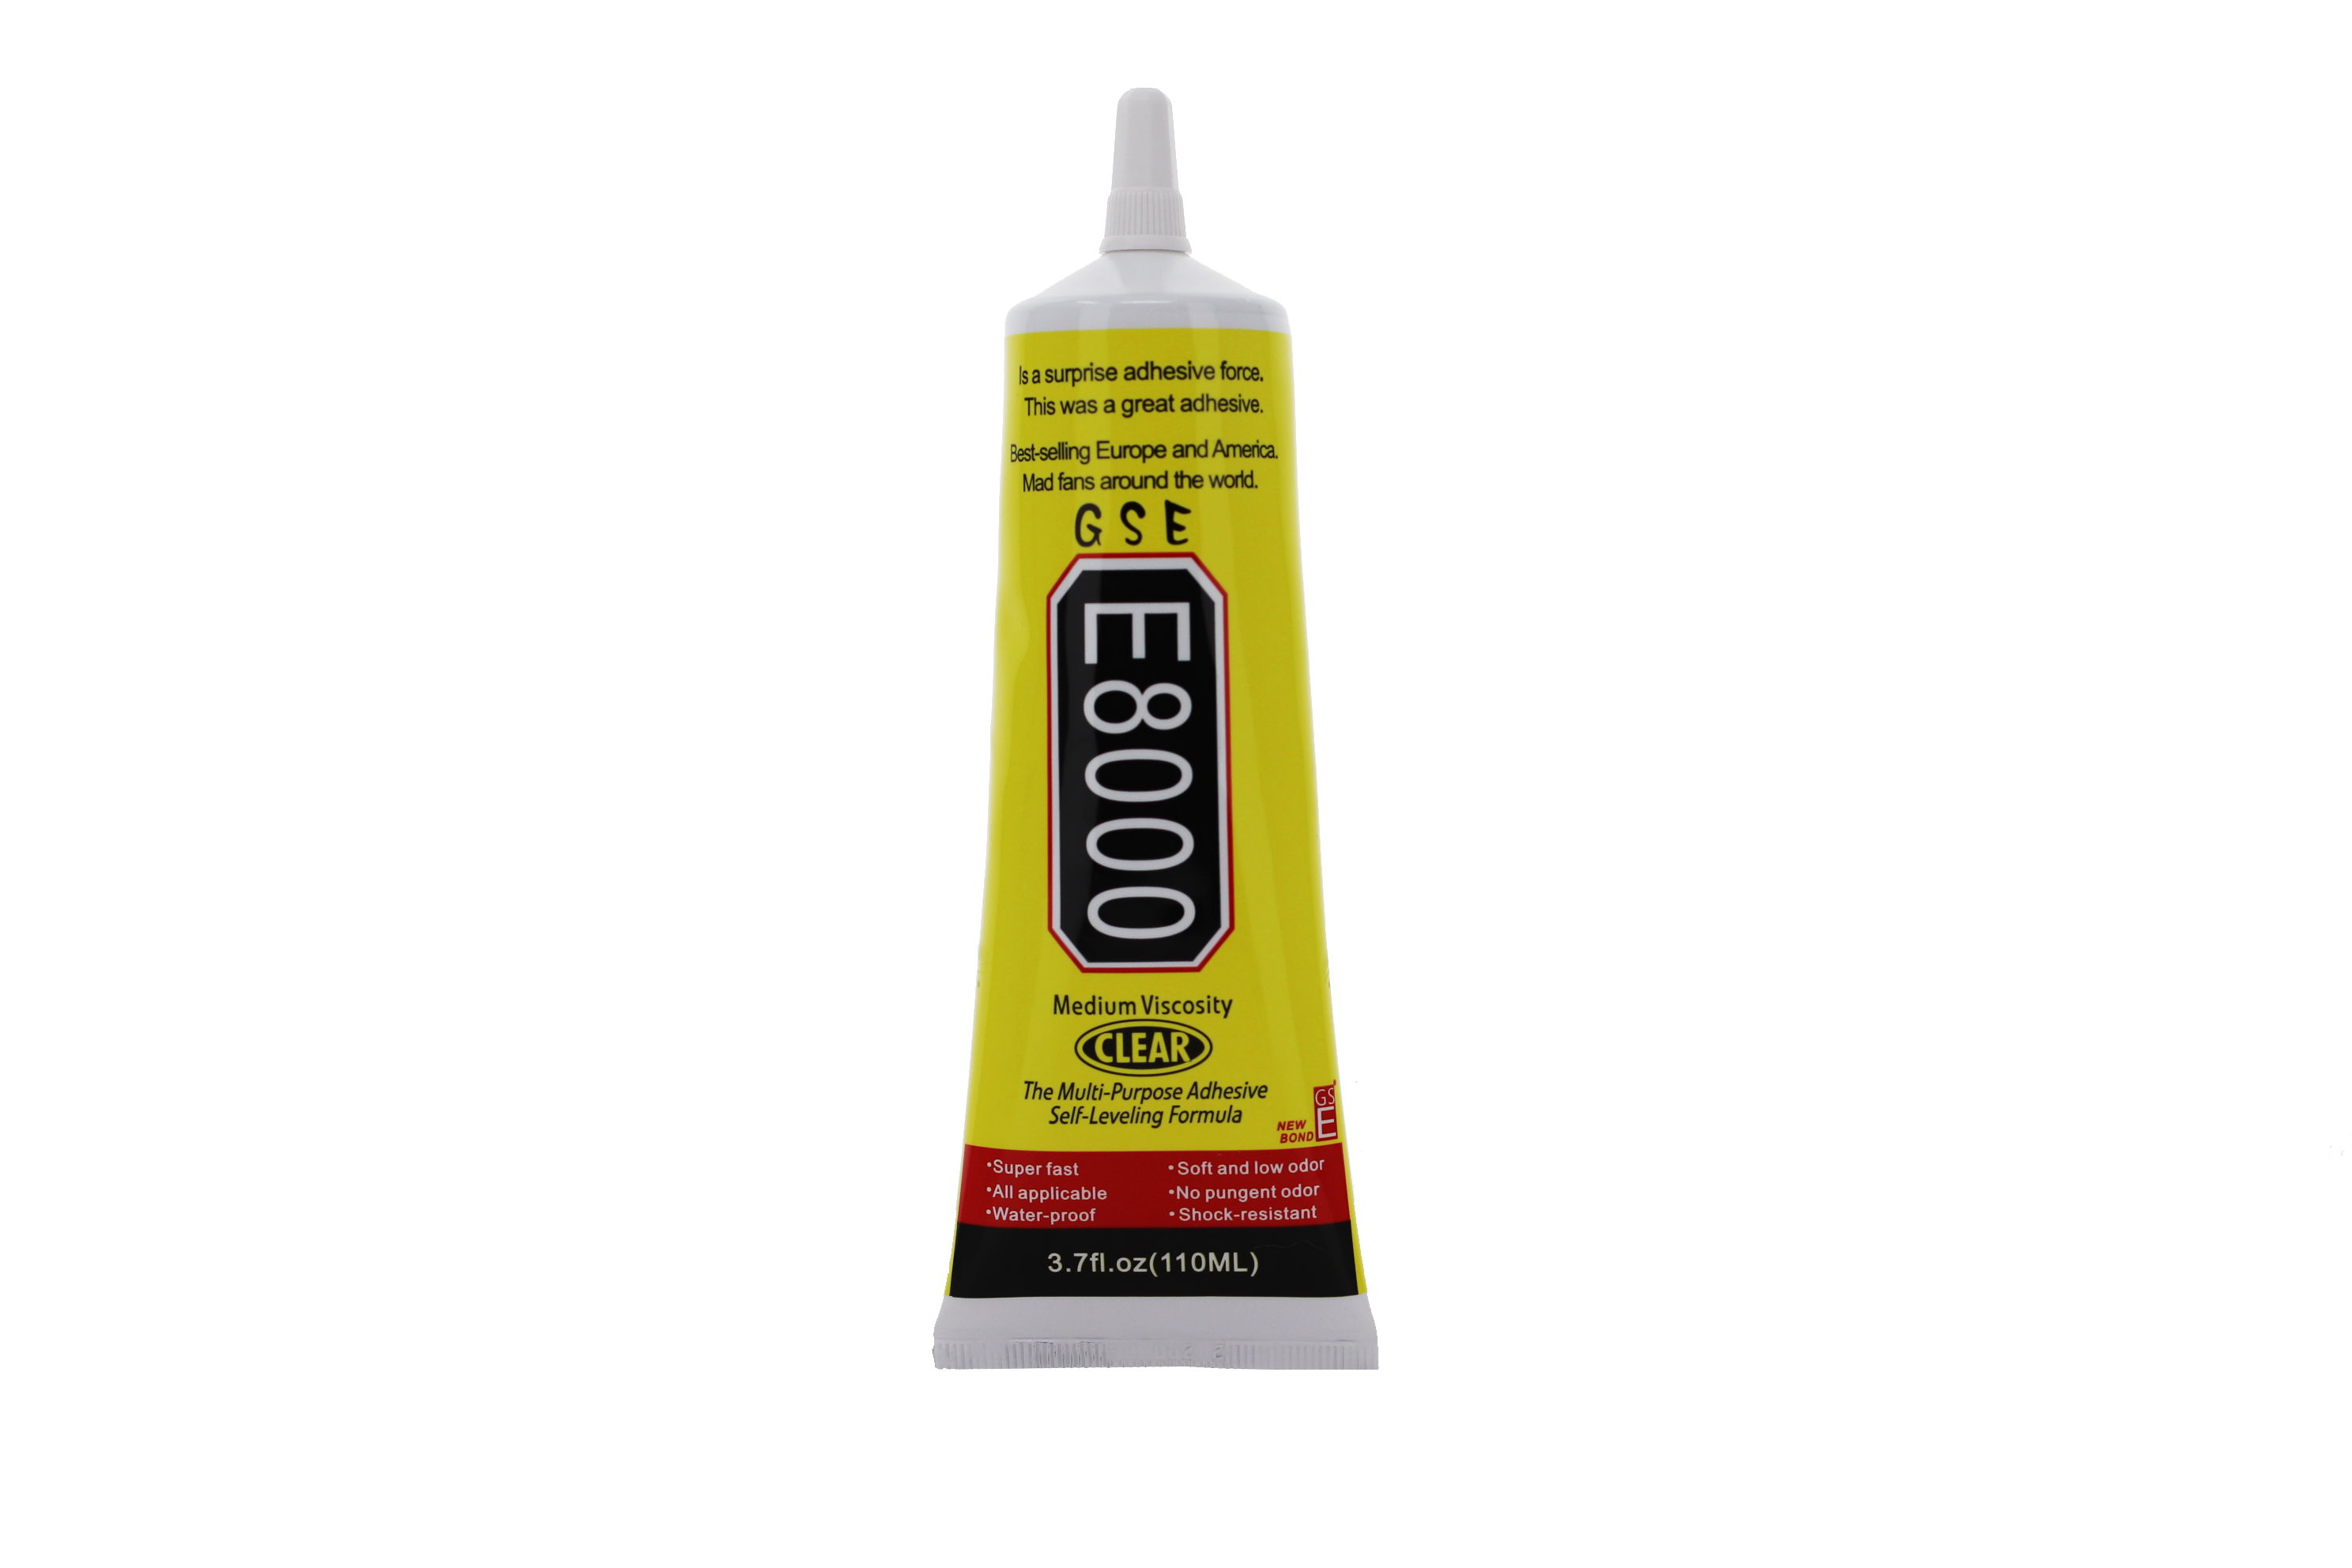 15ML E8000 Glue Industrial Strength Adhesive GEL with Small Tip for Small  Gluing Small Gluing Projects DIY Craft E8000 Glue Adhesive GEL Industrial  Strength with Small Tip Small 15ML 